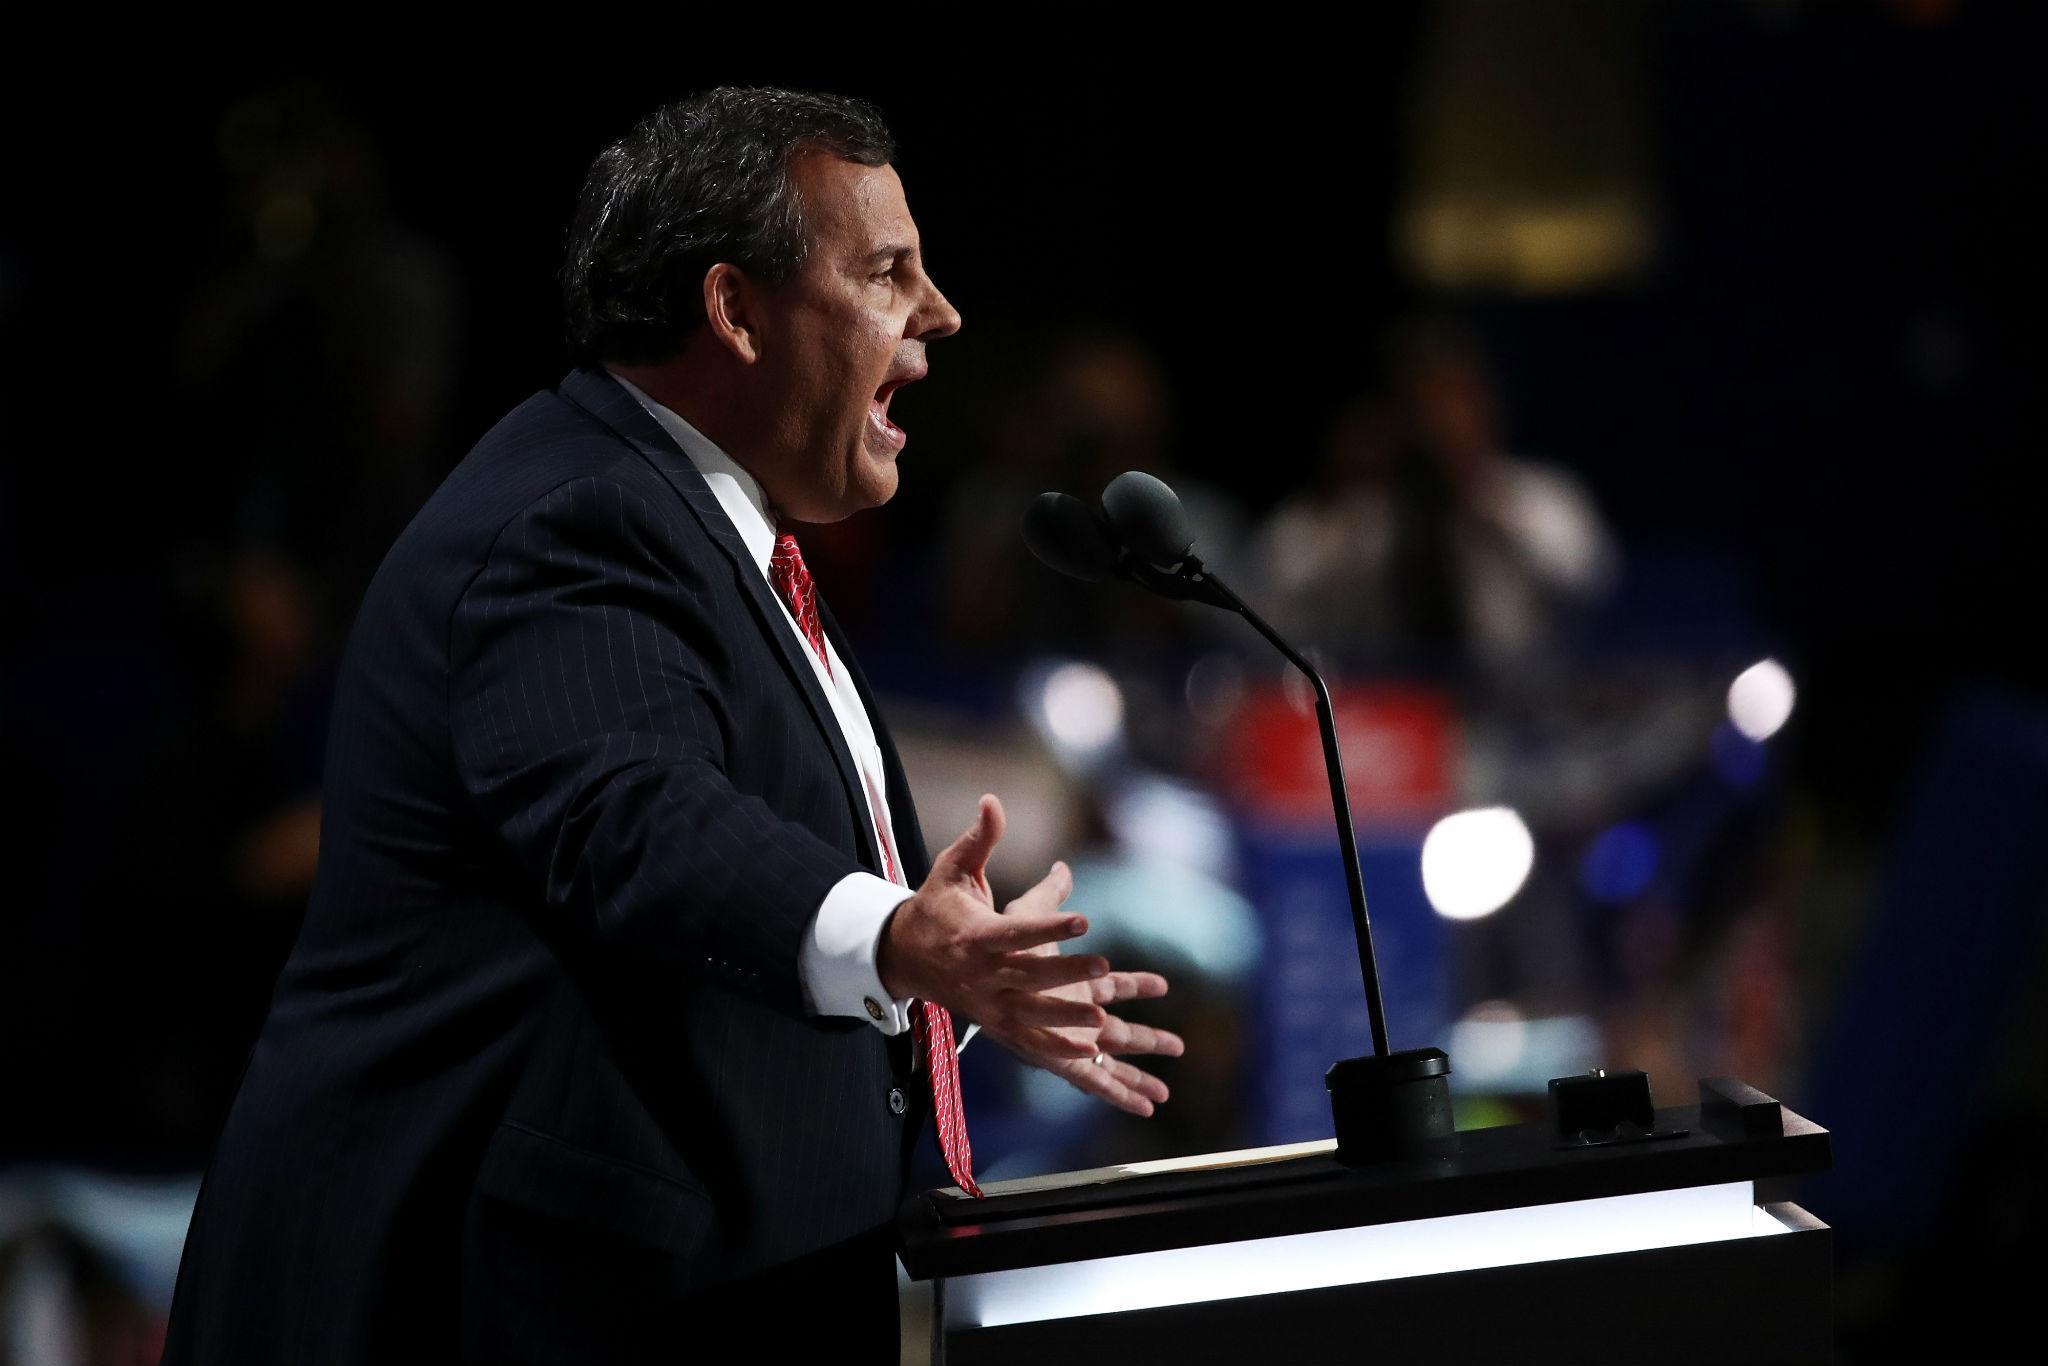 'Every region of the world has been infected with Hillary Clinton's flawed judgment,' Chris Christie told Republican delegates in Cleveland